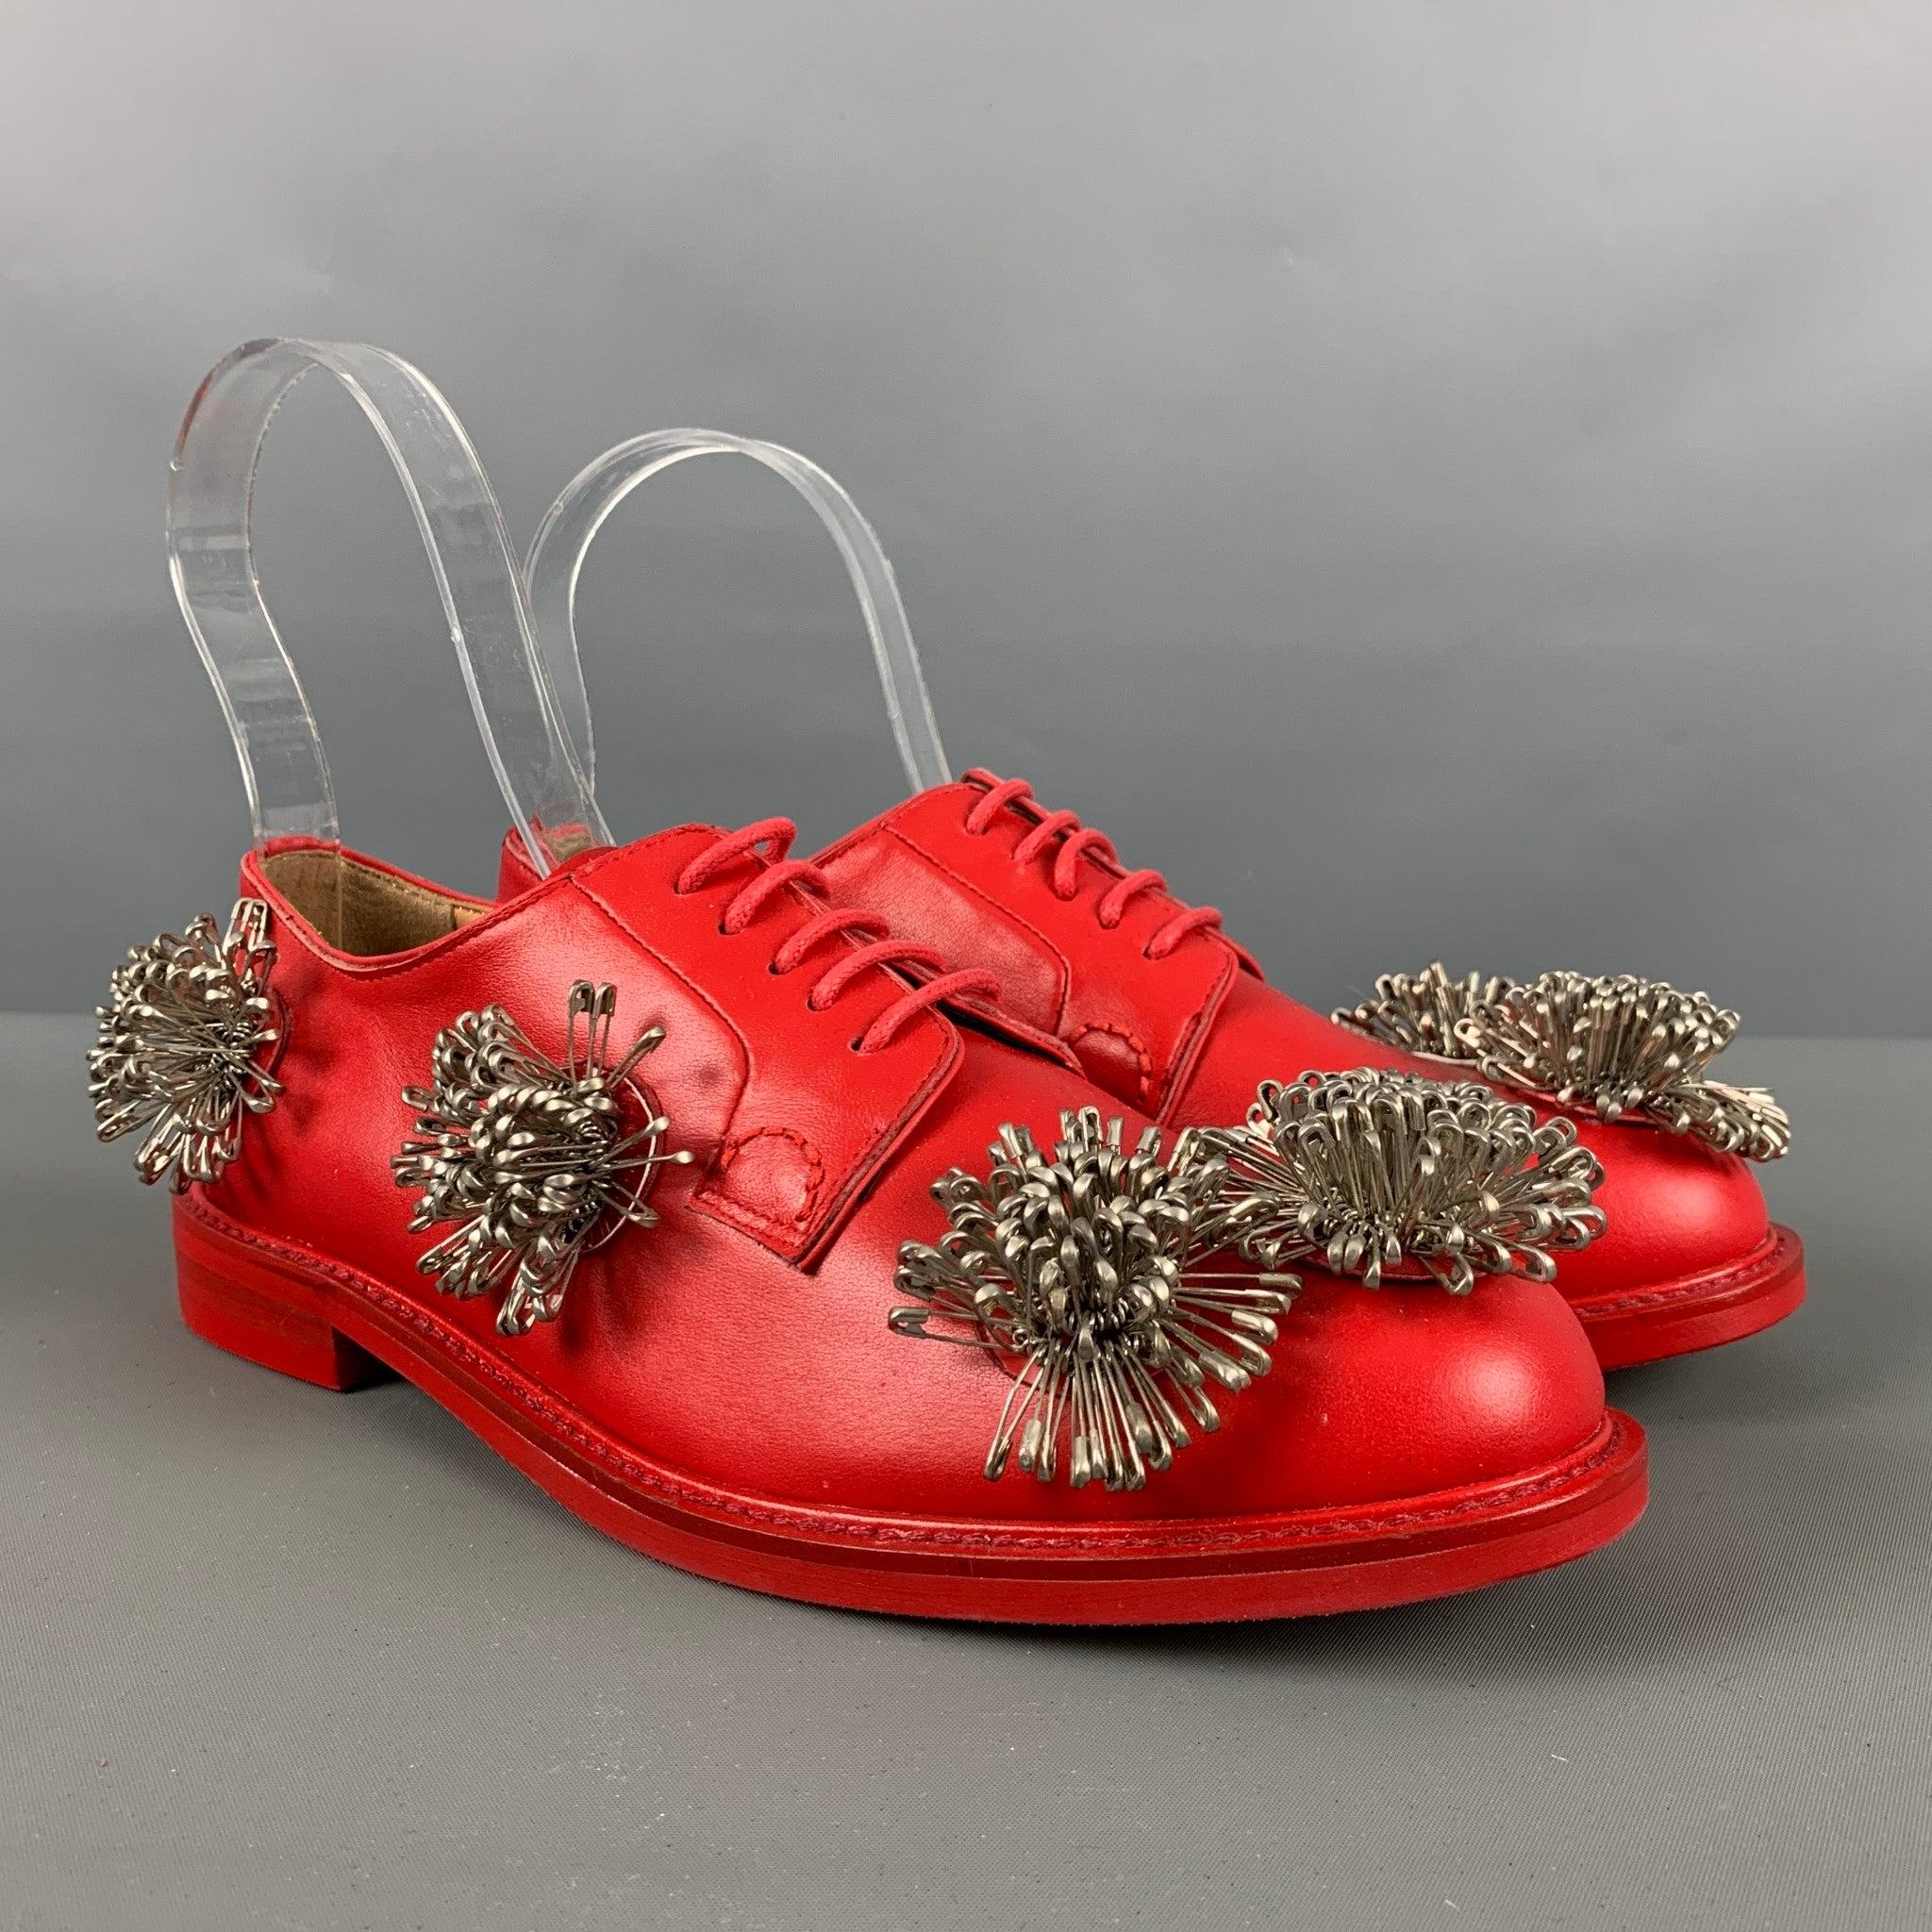 NOIR KEI NINOMIYA CHURCH'S shoes comes in a red leather material featuring silver safety pin details, round toe, and a leather lace up closure. Excellent Pre-Owned Condition.  

Marked:   D 60216Outsole: 10.75 inches  x 3.75 inches  
  
  
